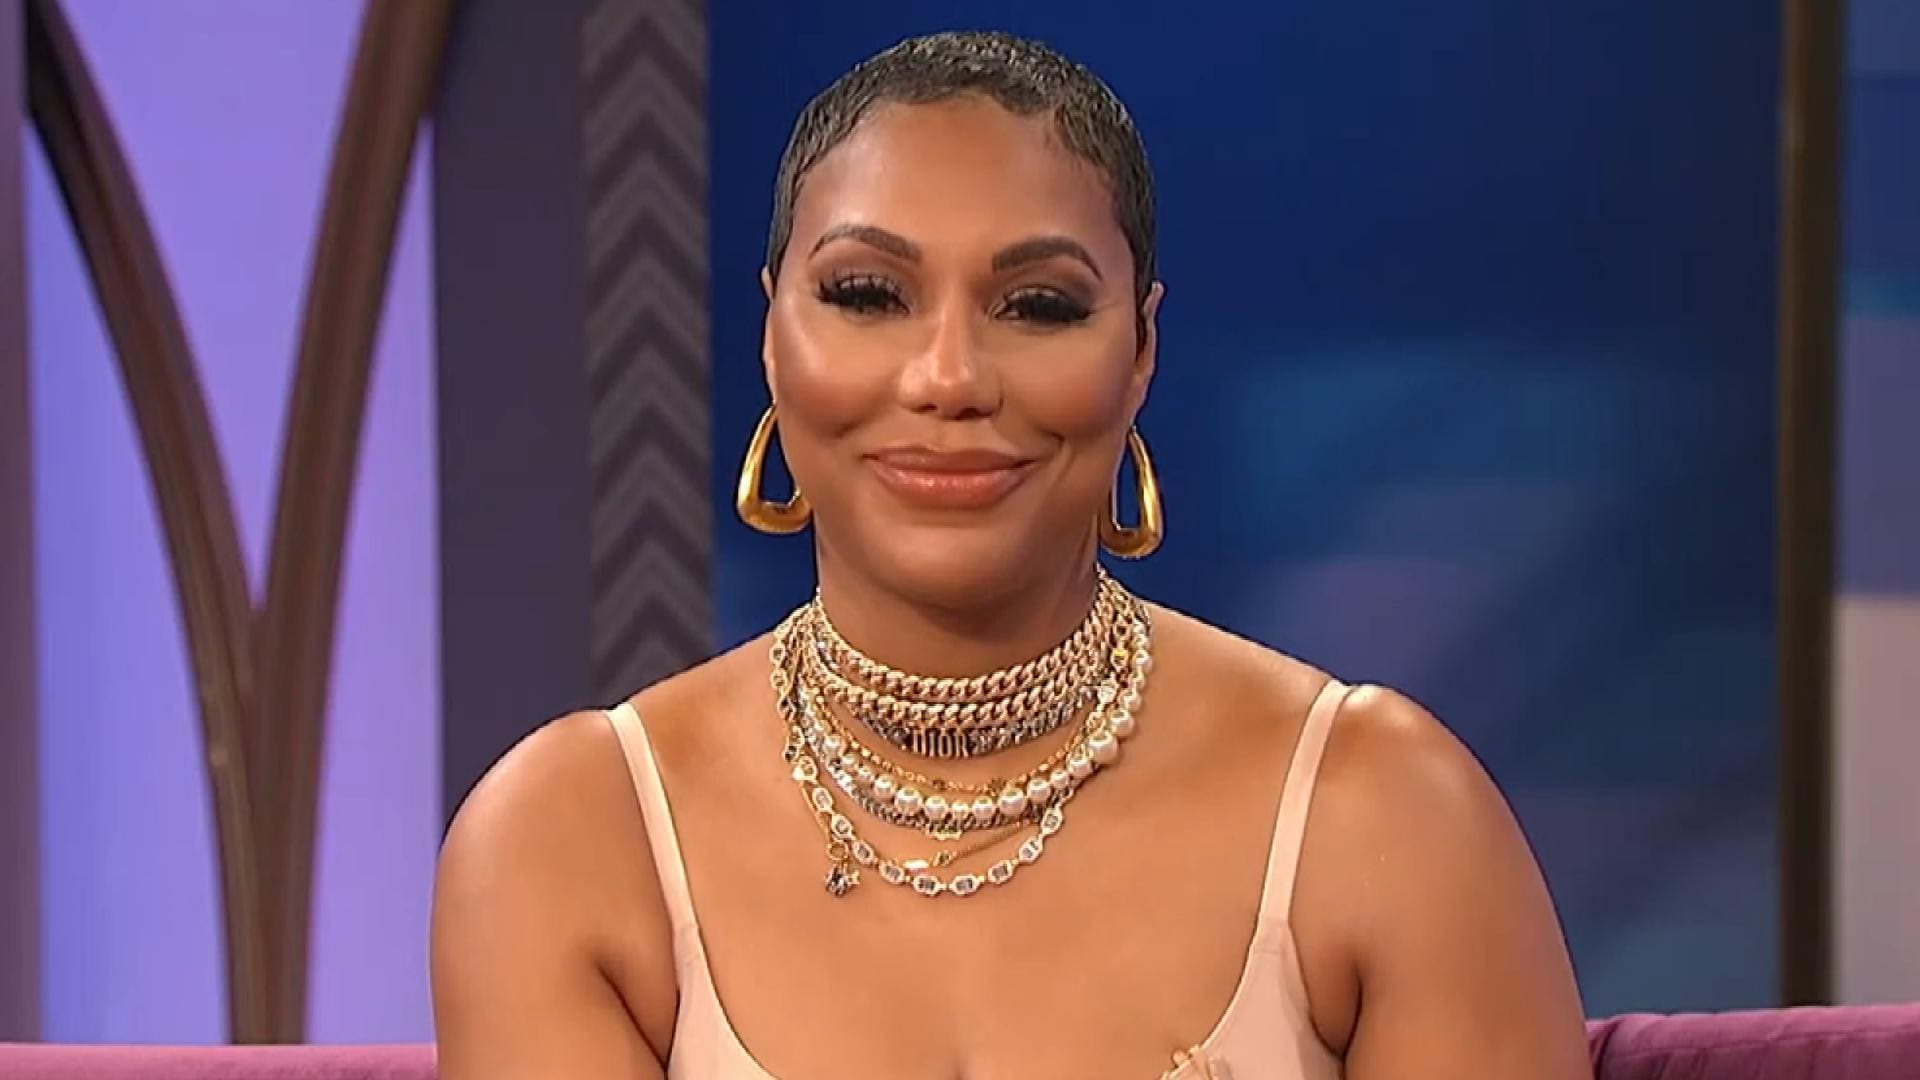 Tamar Braxton Talks About Self-Medicating With Food And Fans Love Her Honesty - See The Video